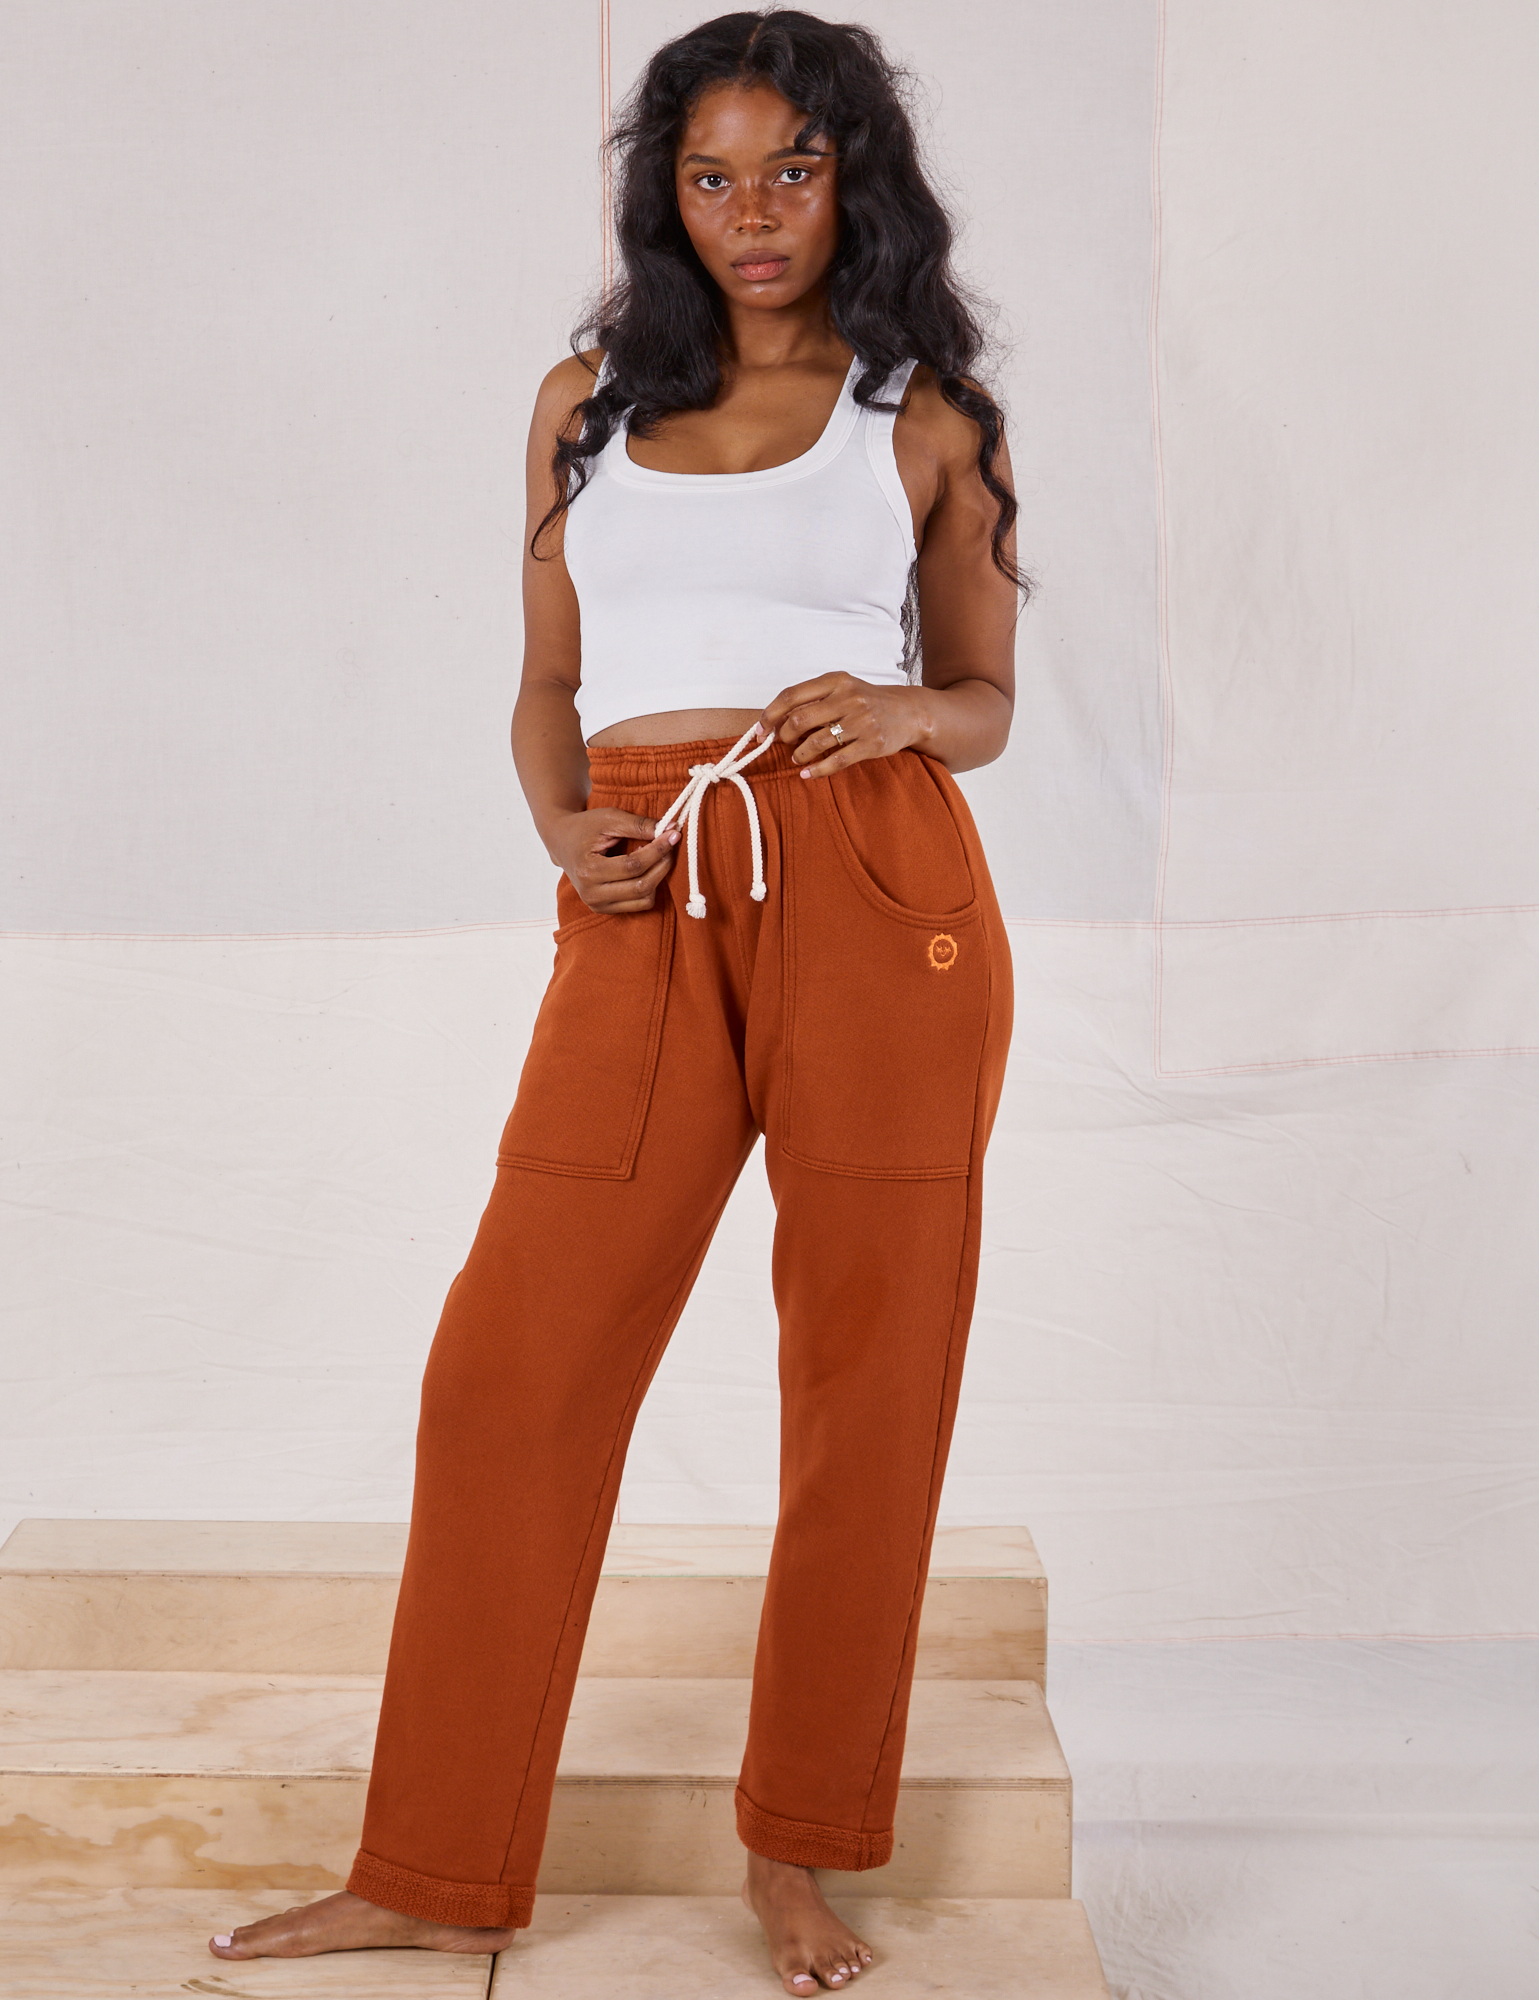 Kandia is 5&#39;3&quot; and wearing P Rolled Cuff Sweat Pants in Burnt Terracotta paired with vintage off-white Cropped Tank